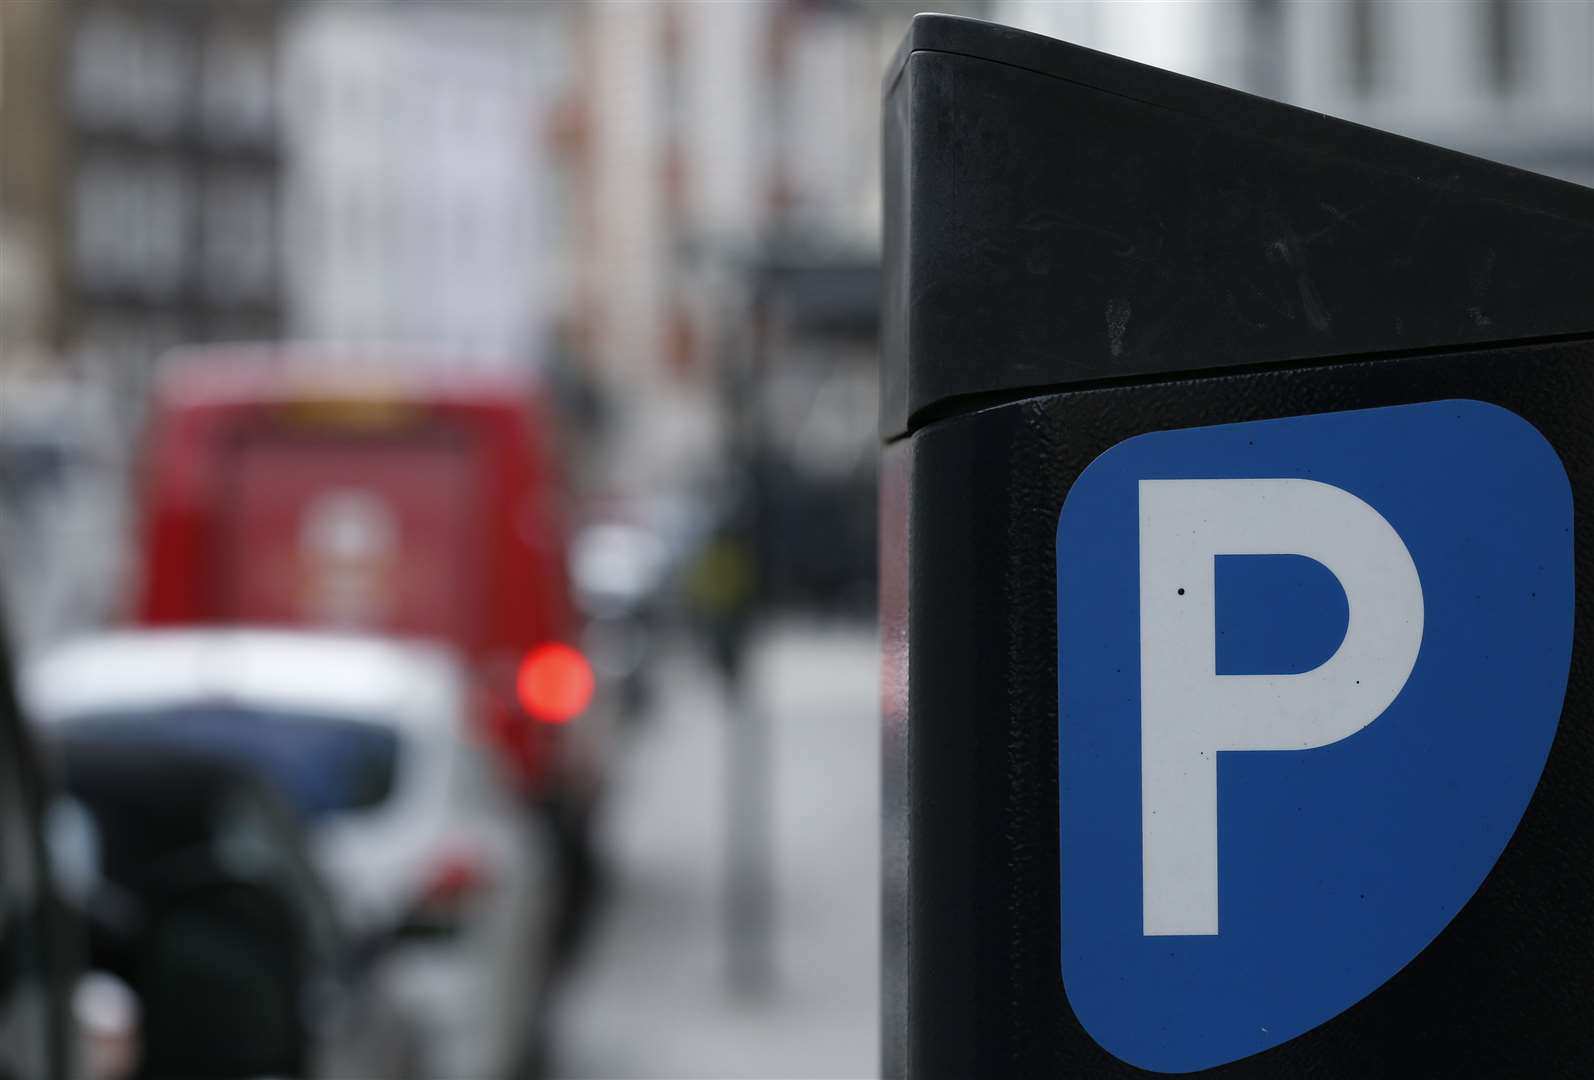 Swale council has announced changes to its parking policy in response to the coronavirus outbreak